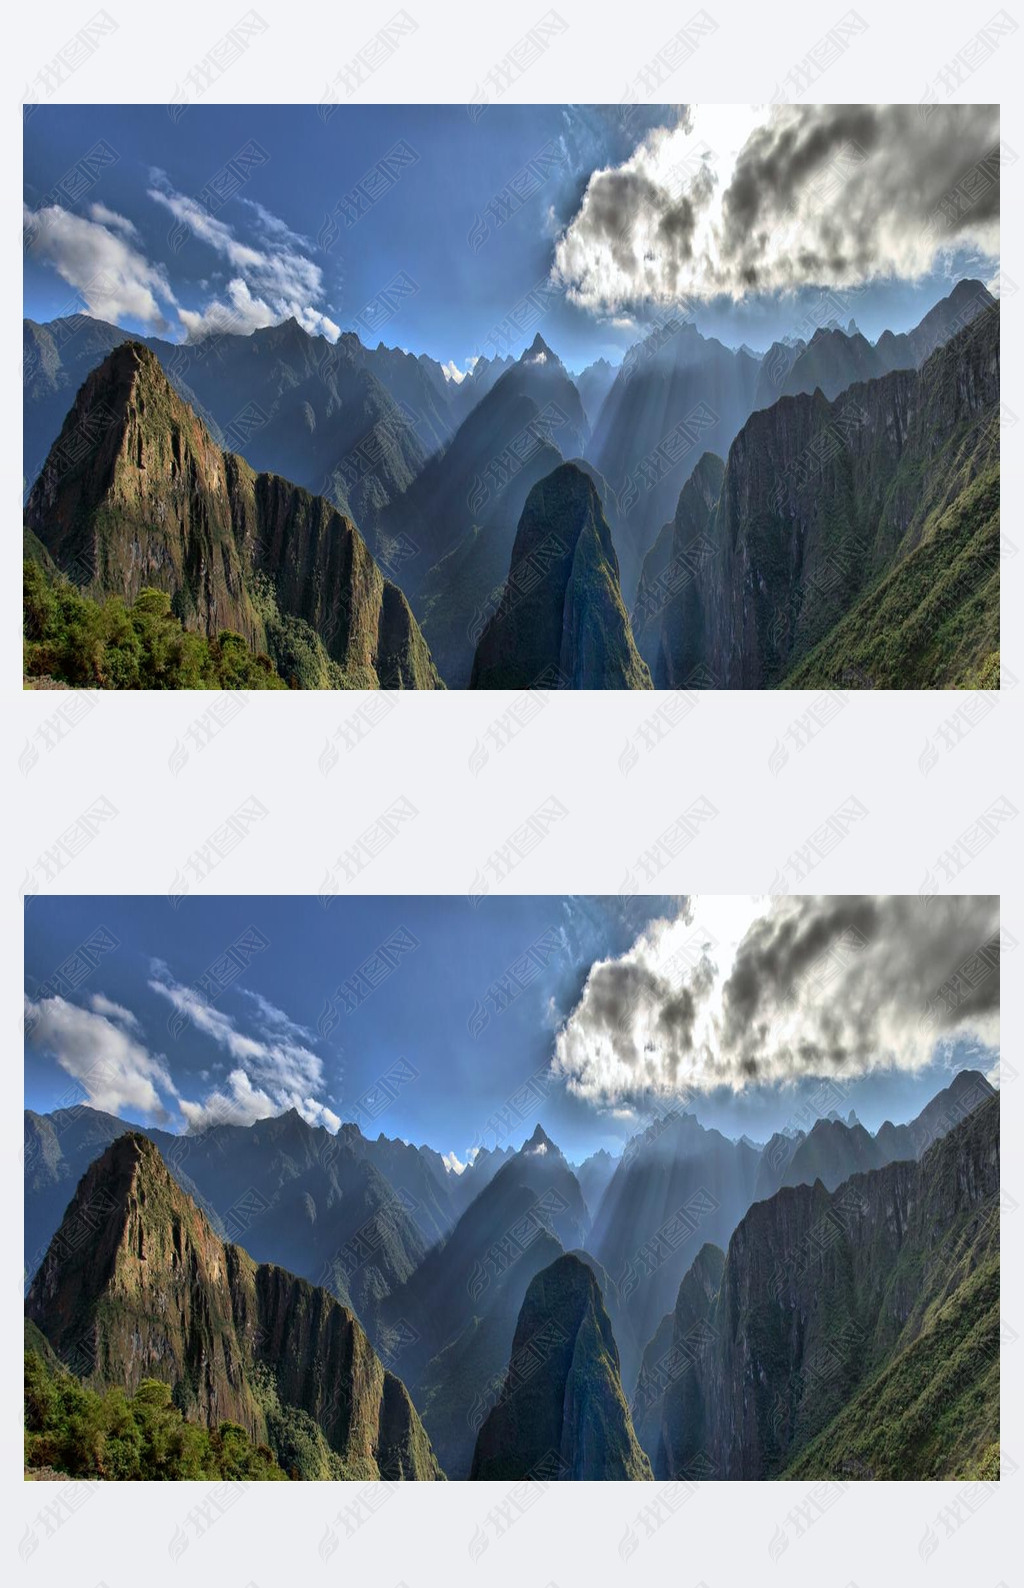 View of Andes Mountain Range - Machu Picchu